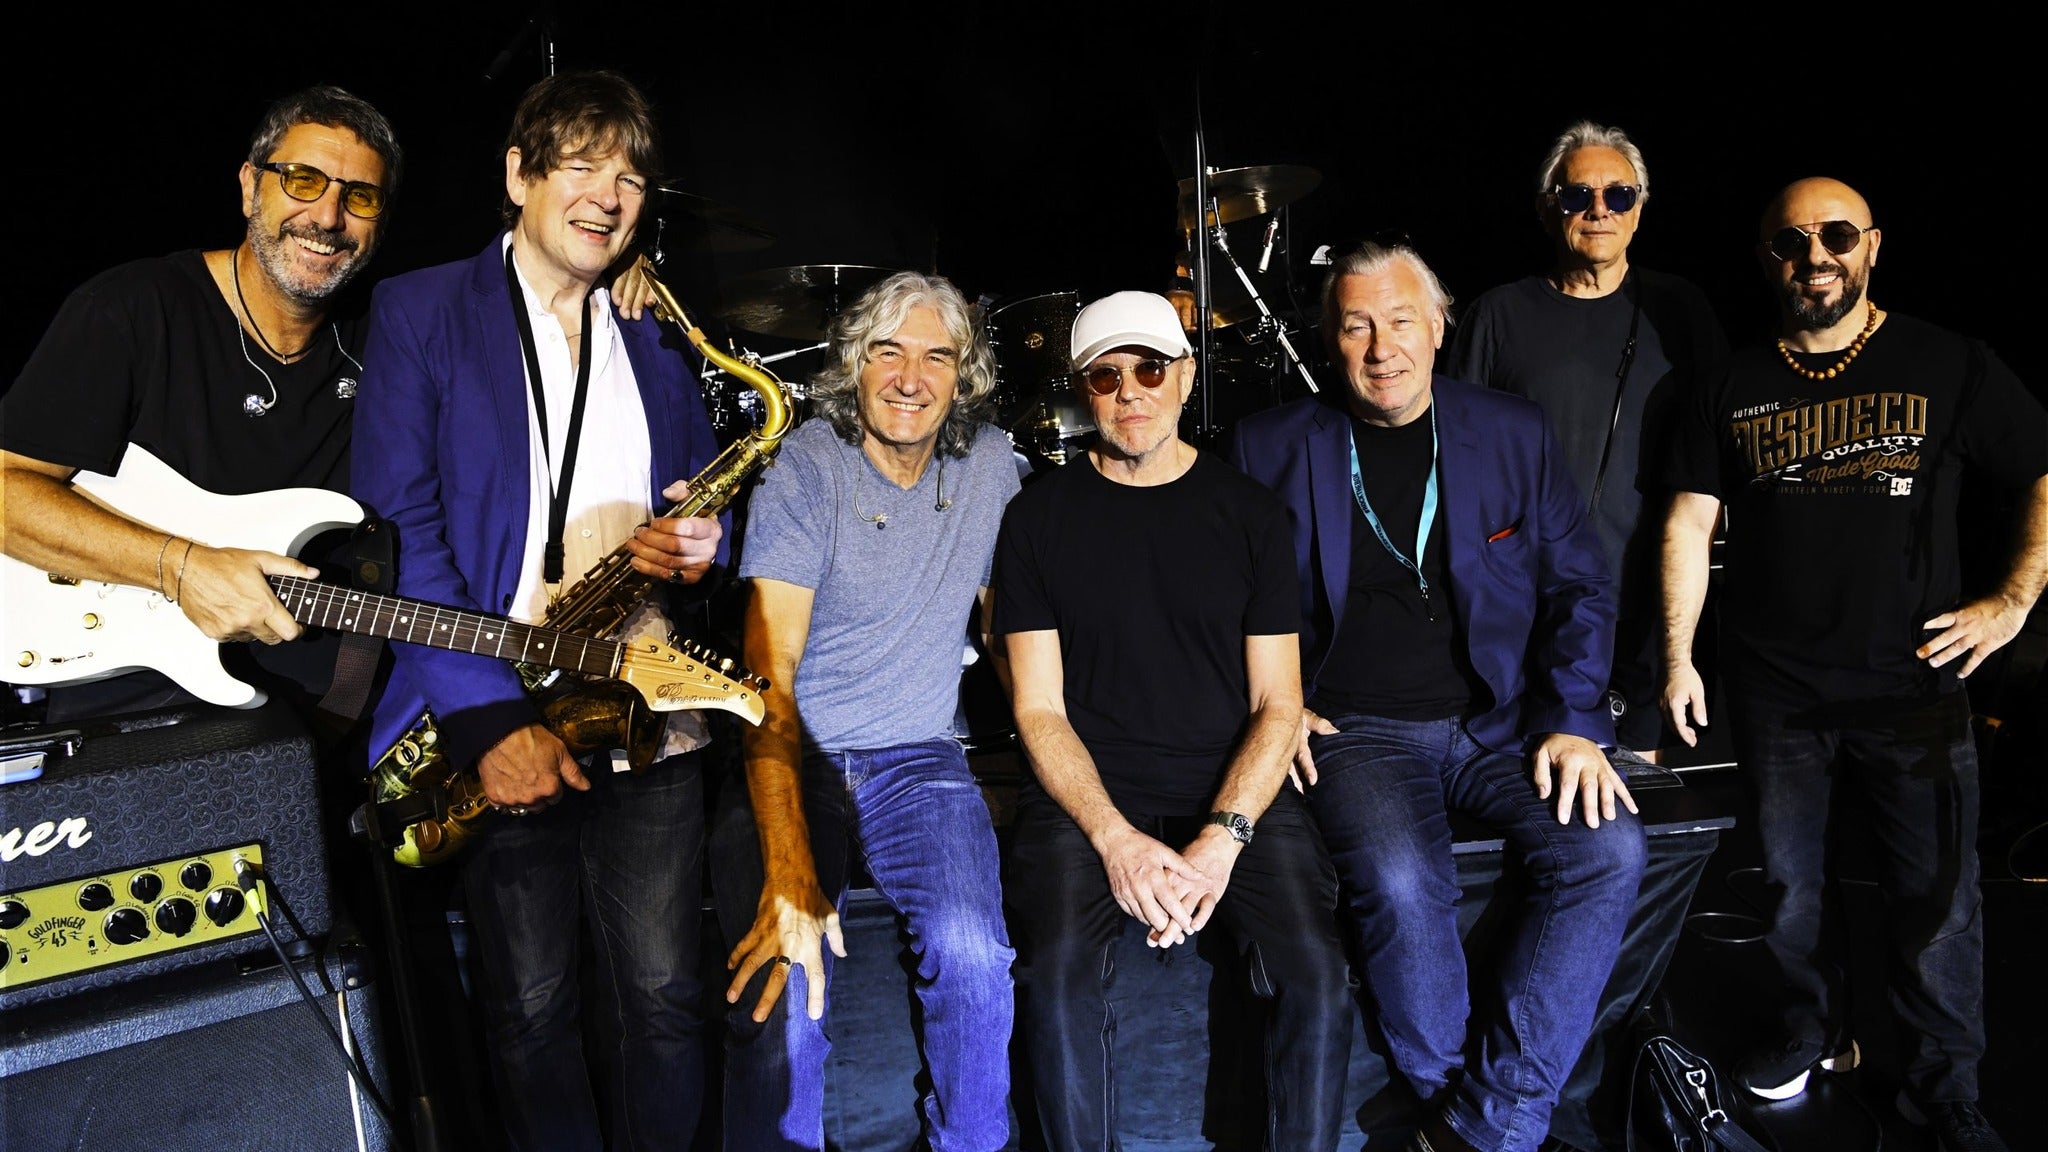 DSL* Dire Straits Legacy in Fort Wayne promo photo for Exclusive presale offer code